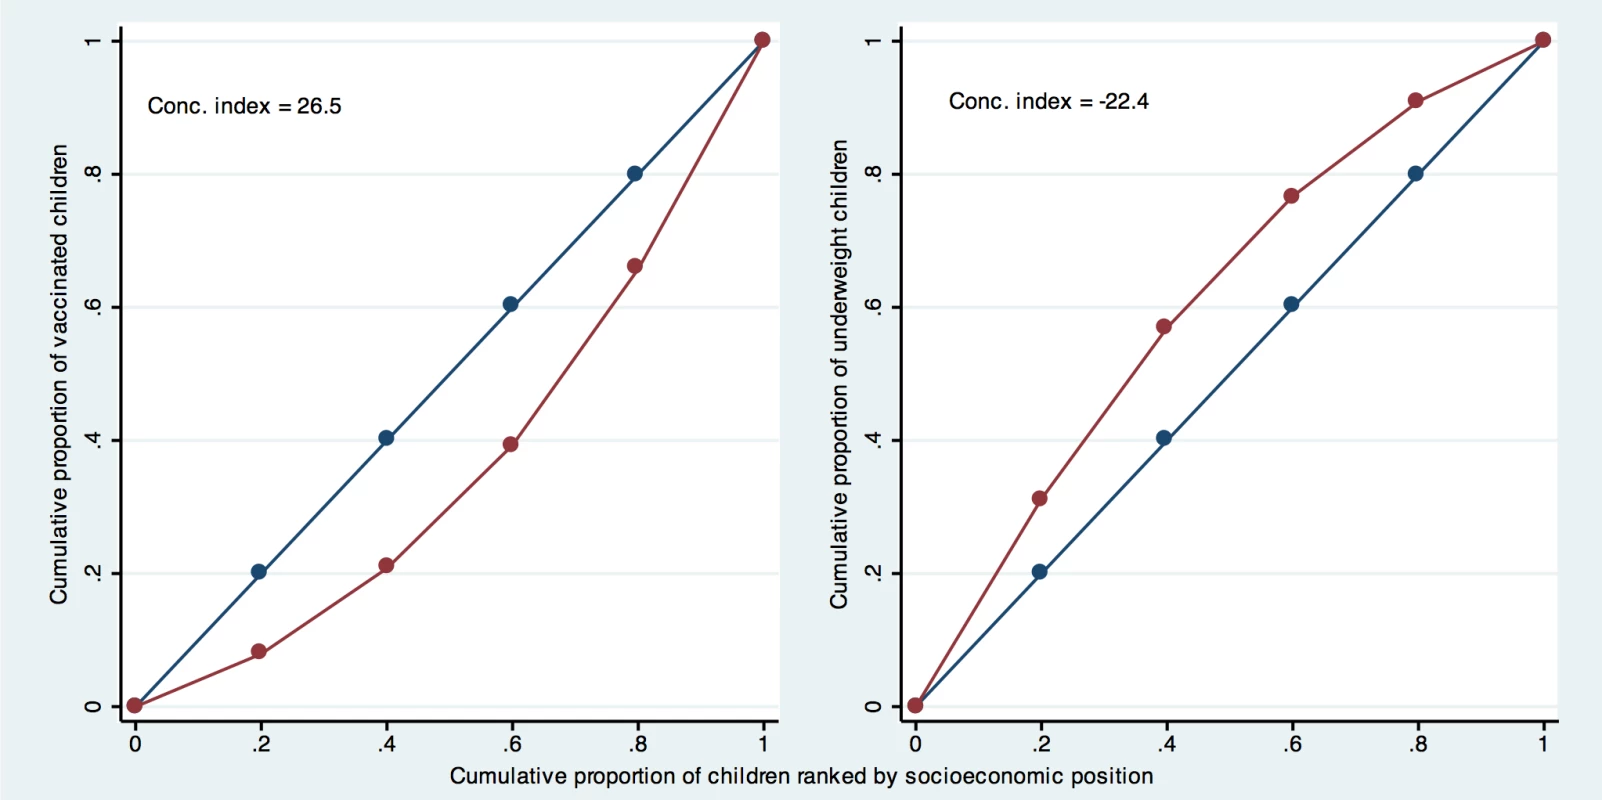 Concentration curve for measles vaccination and underweight using data from the Nigeria 2008 DHS.